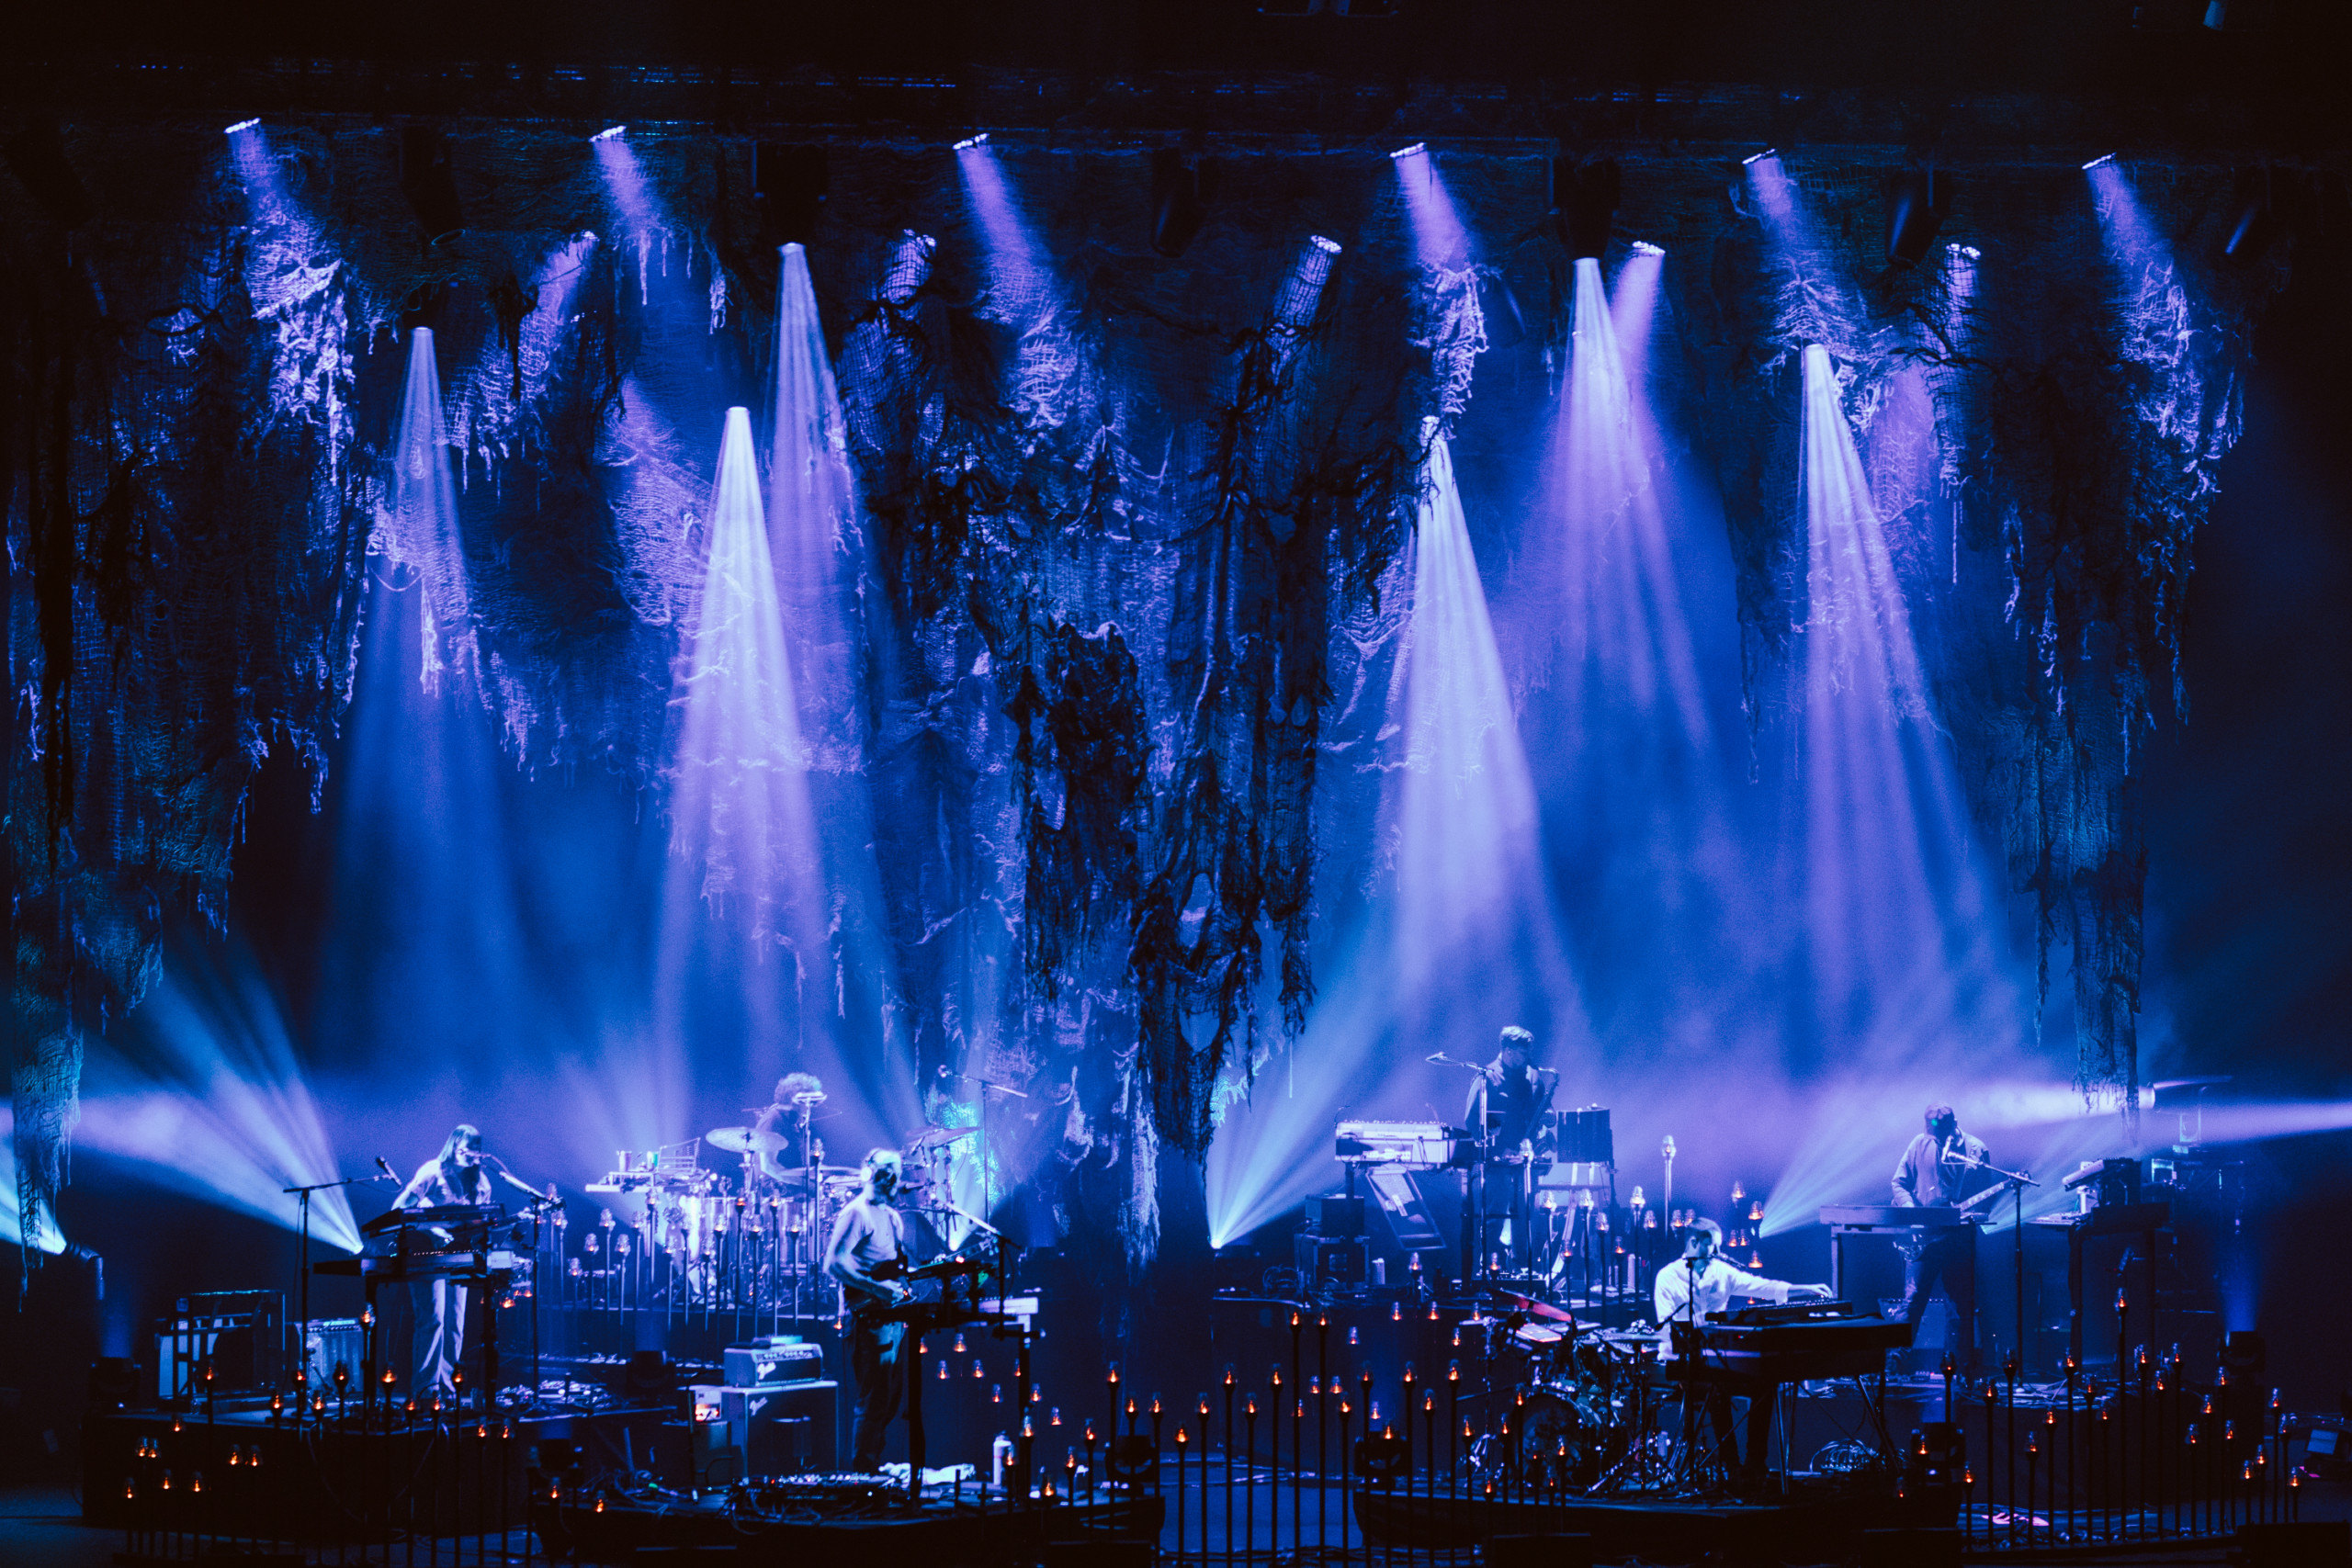 Purple lights enchant the stage at the final show of Bon Iver's 2021 tour.